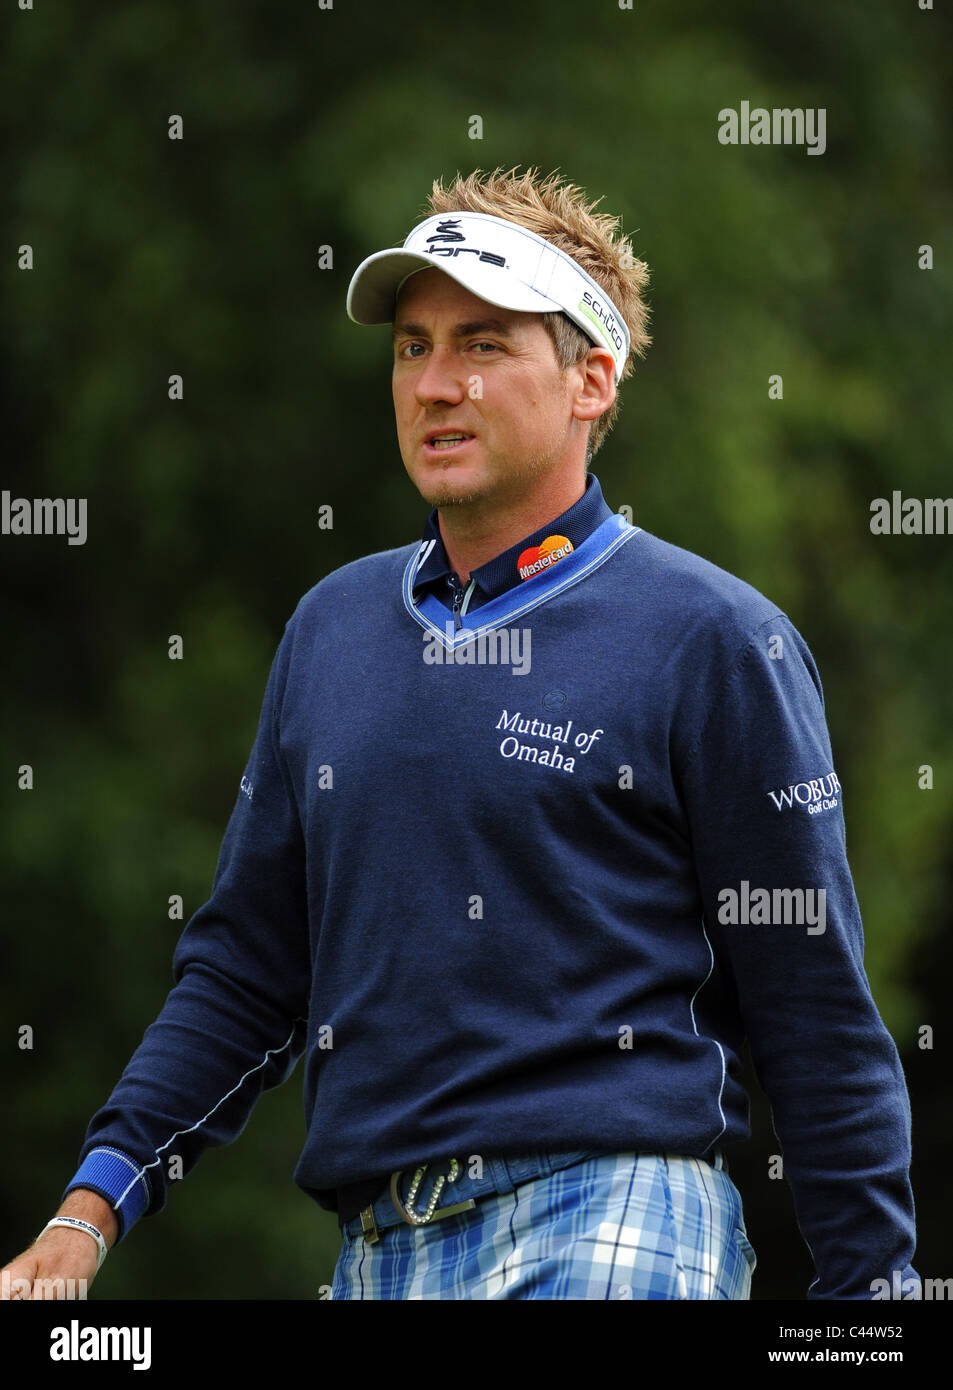 Professional Golfer In Ian Poulter plays a shot Stock Photo